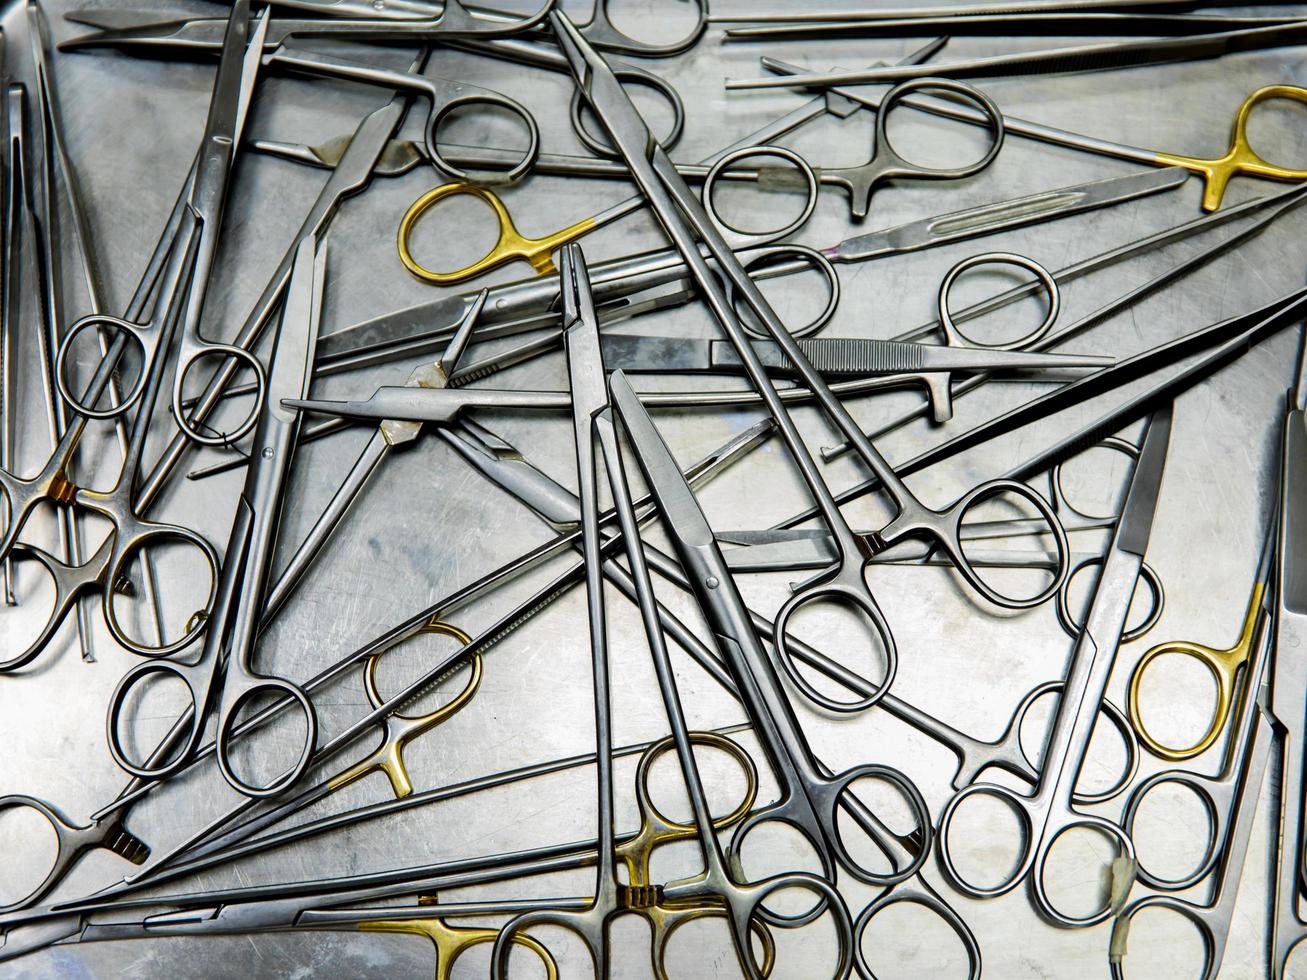 Surgical instruments black and white close-up photo